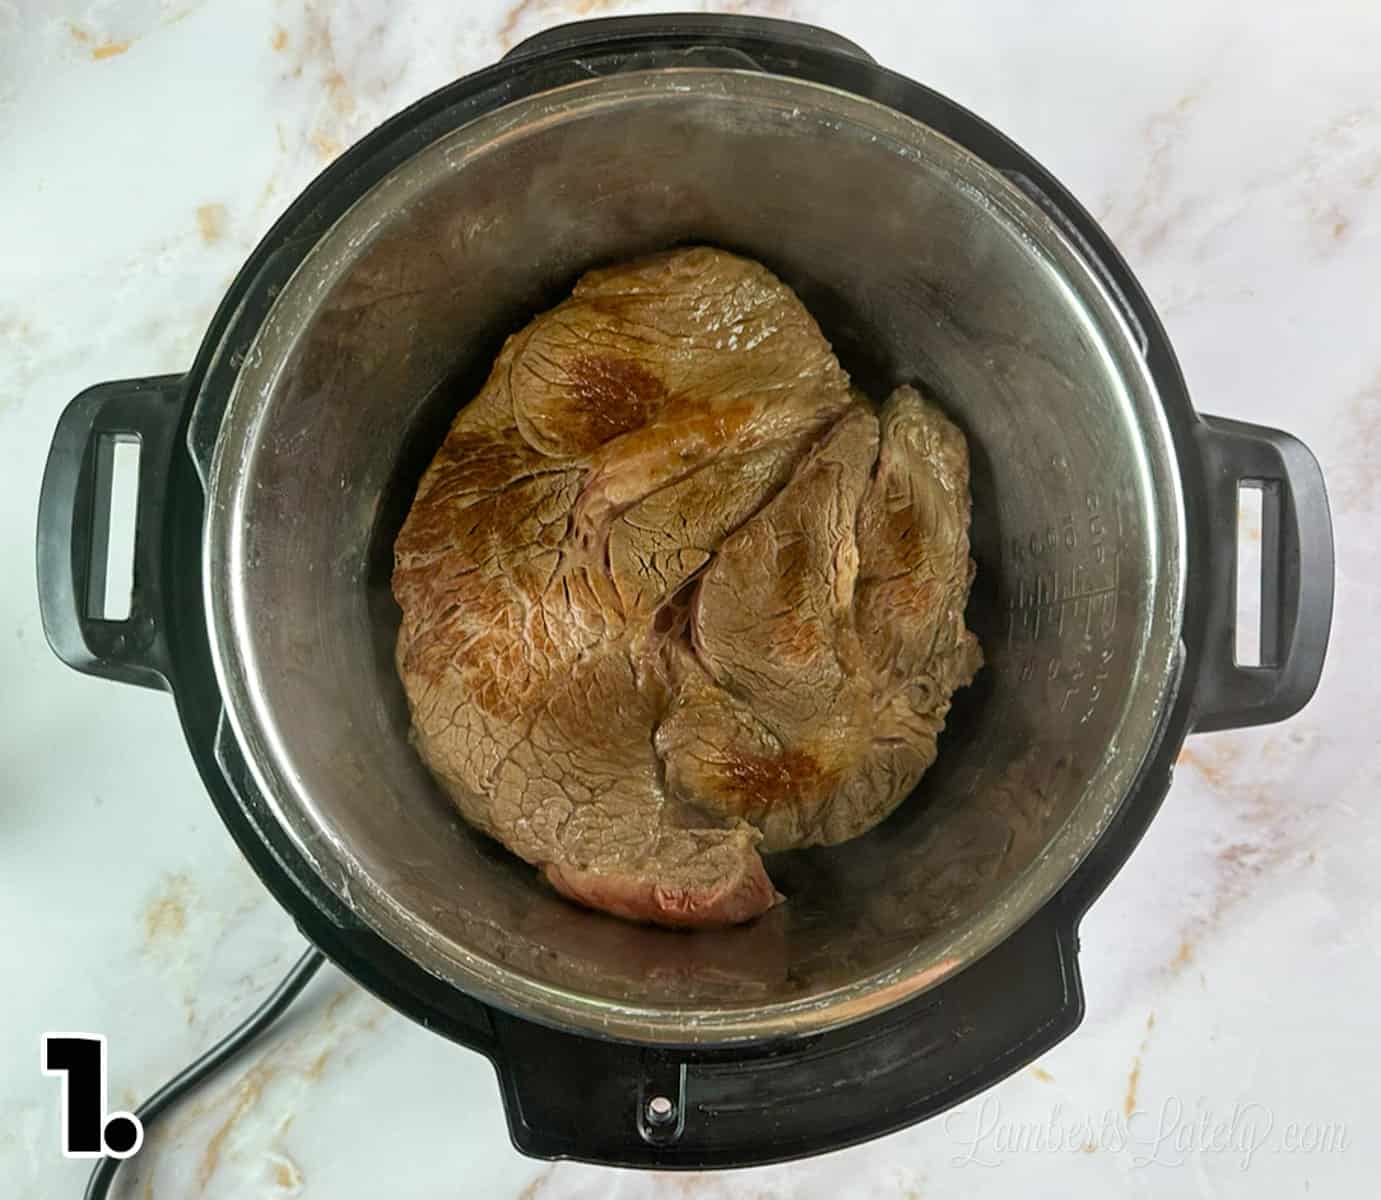 browning a beef chuck roast in an instant pot.